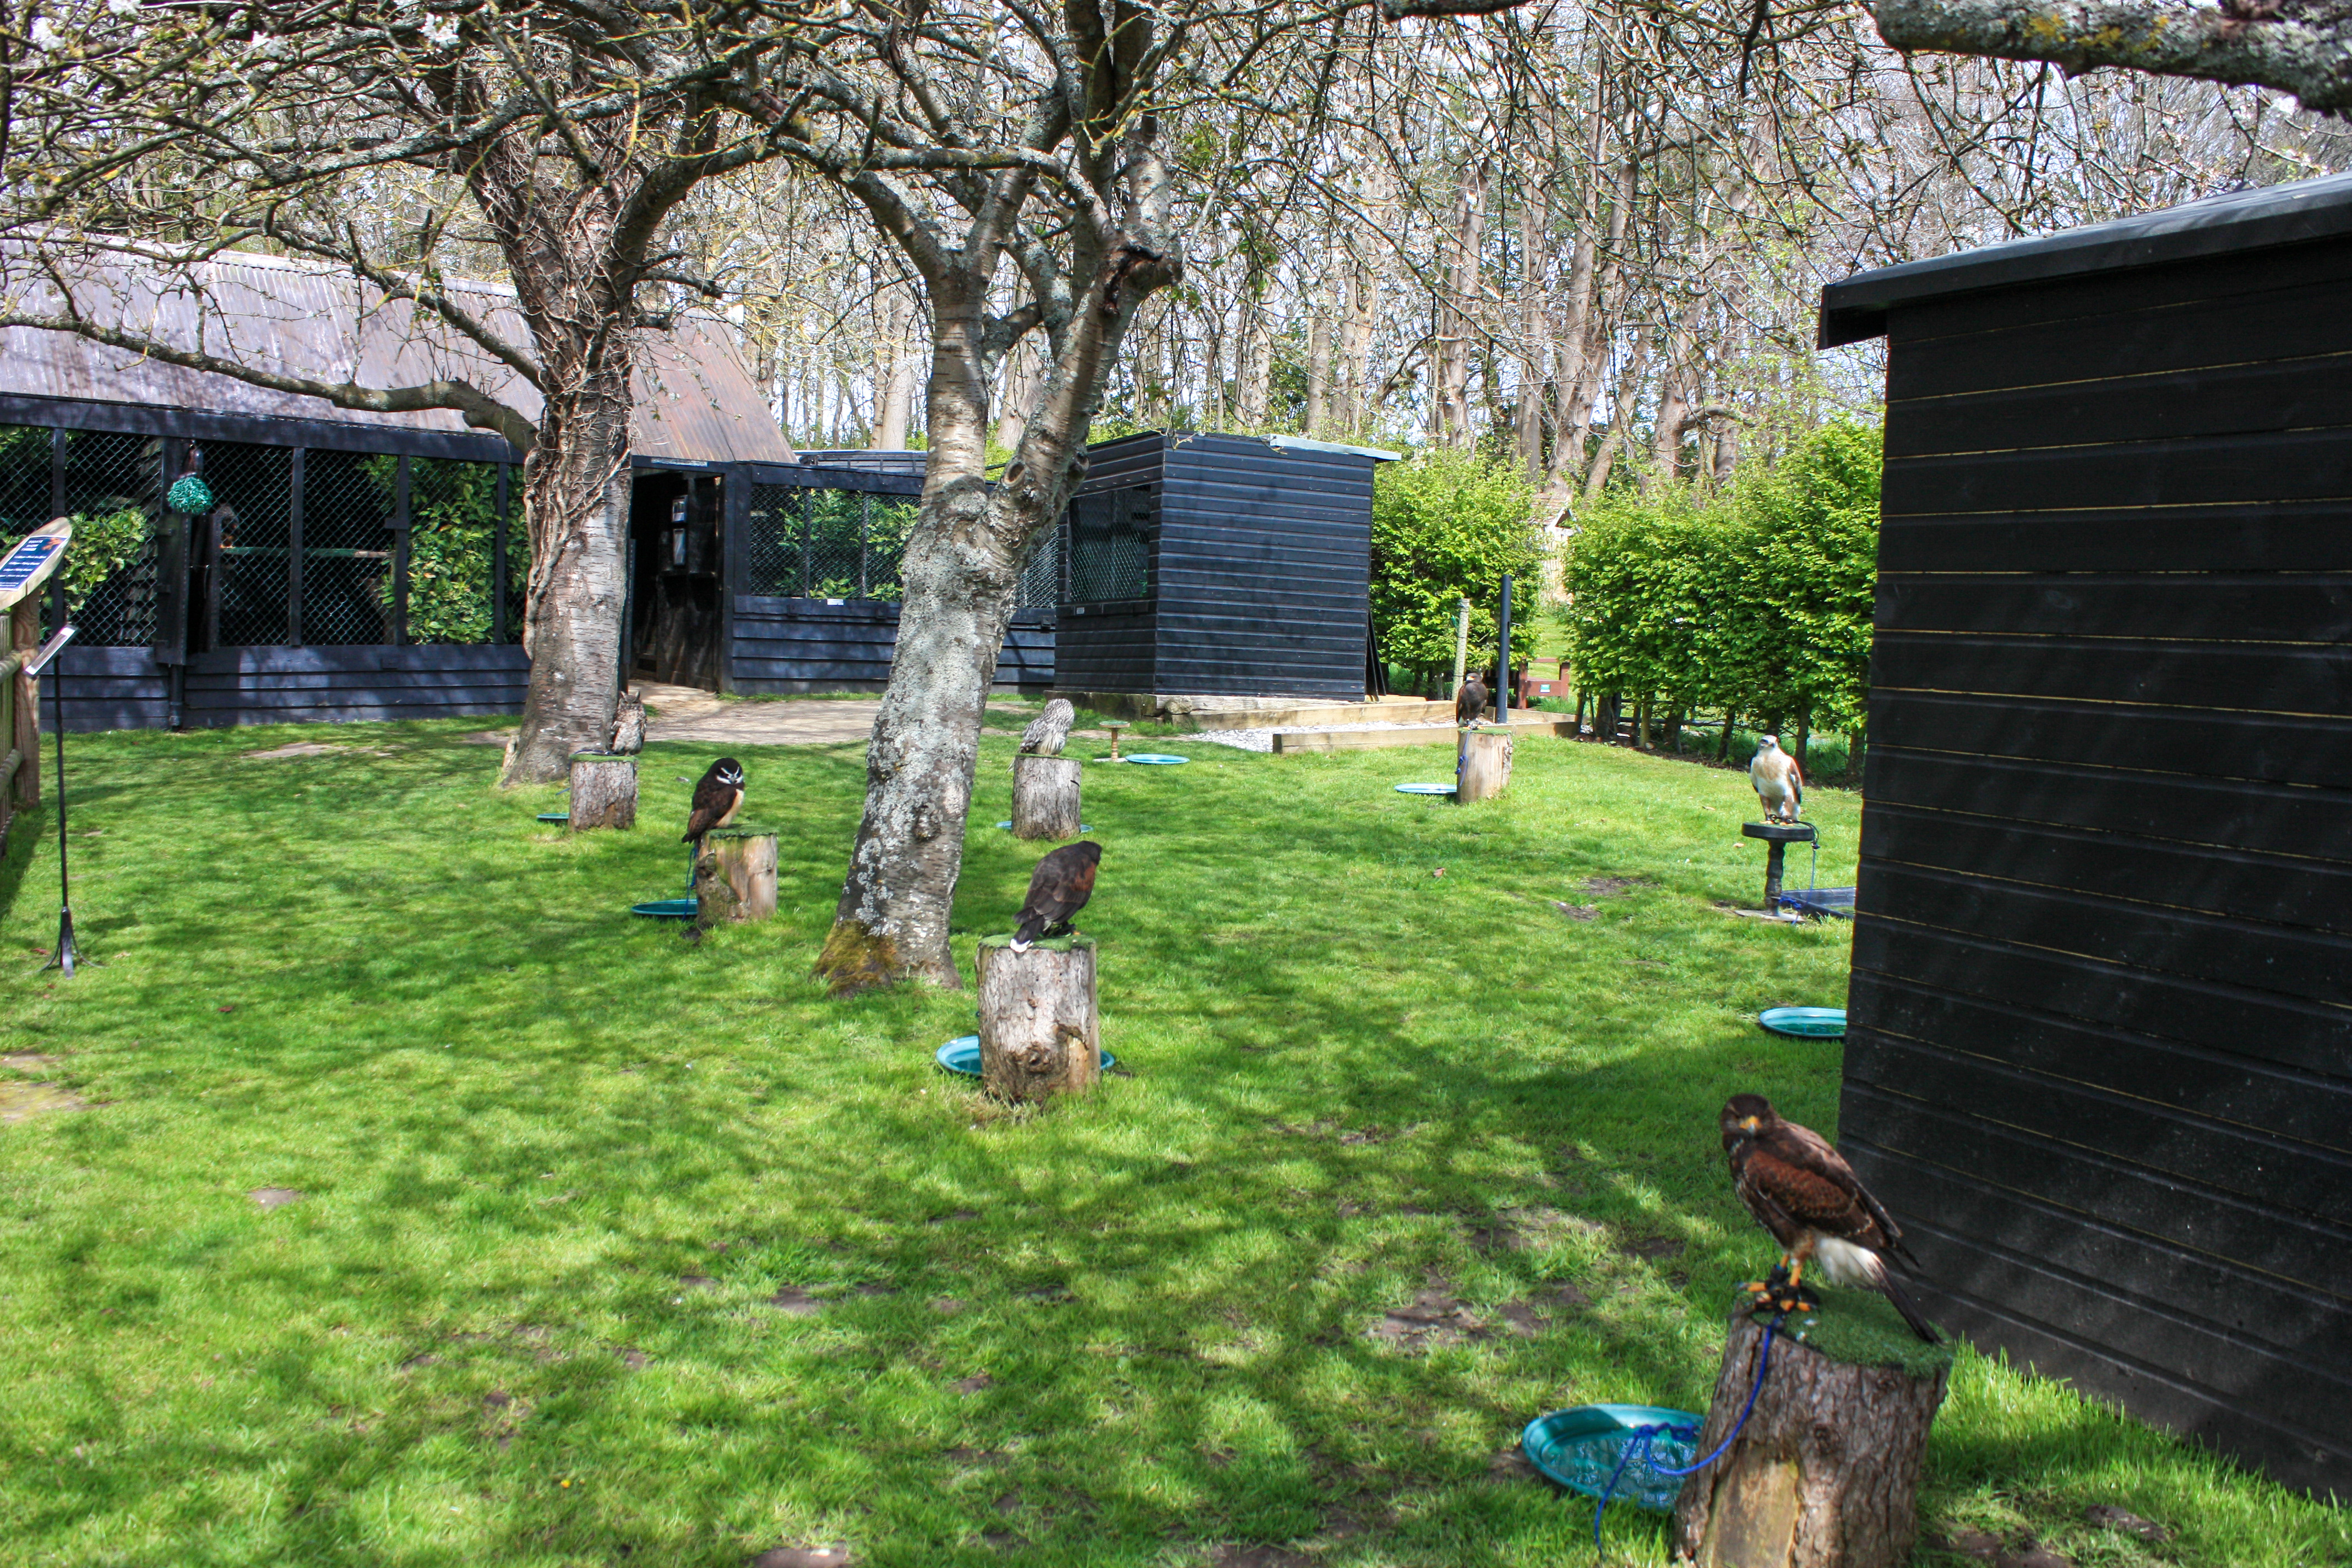 Enclosed lawned garden area with various birds of prey standing on tree stumps